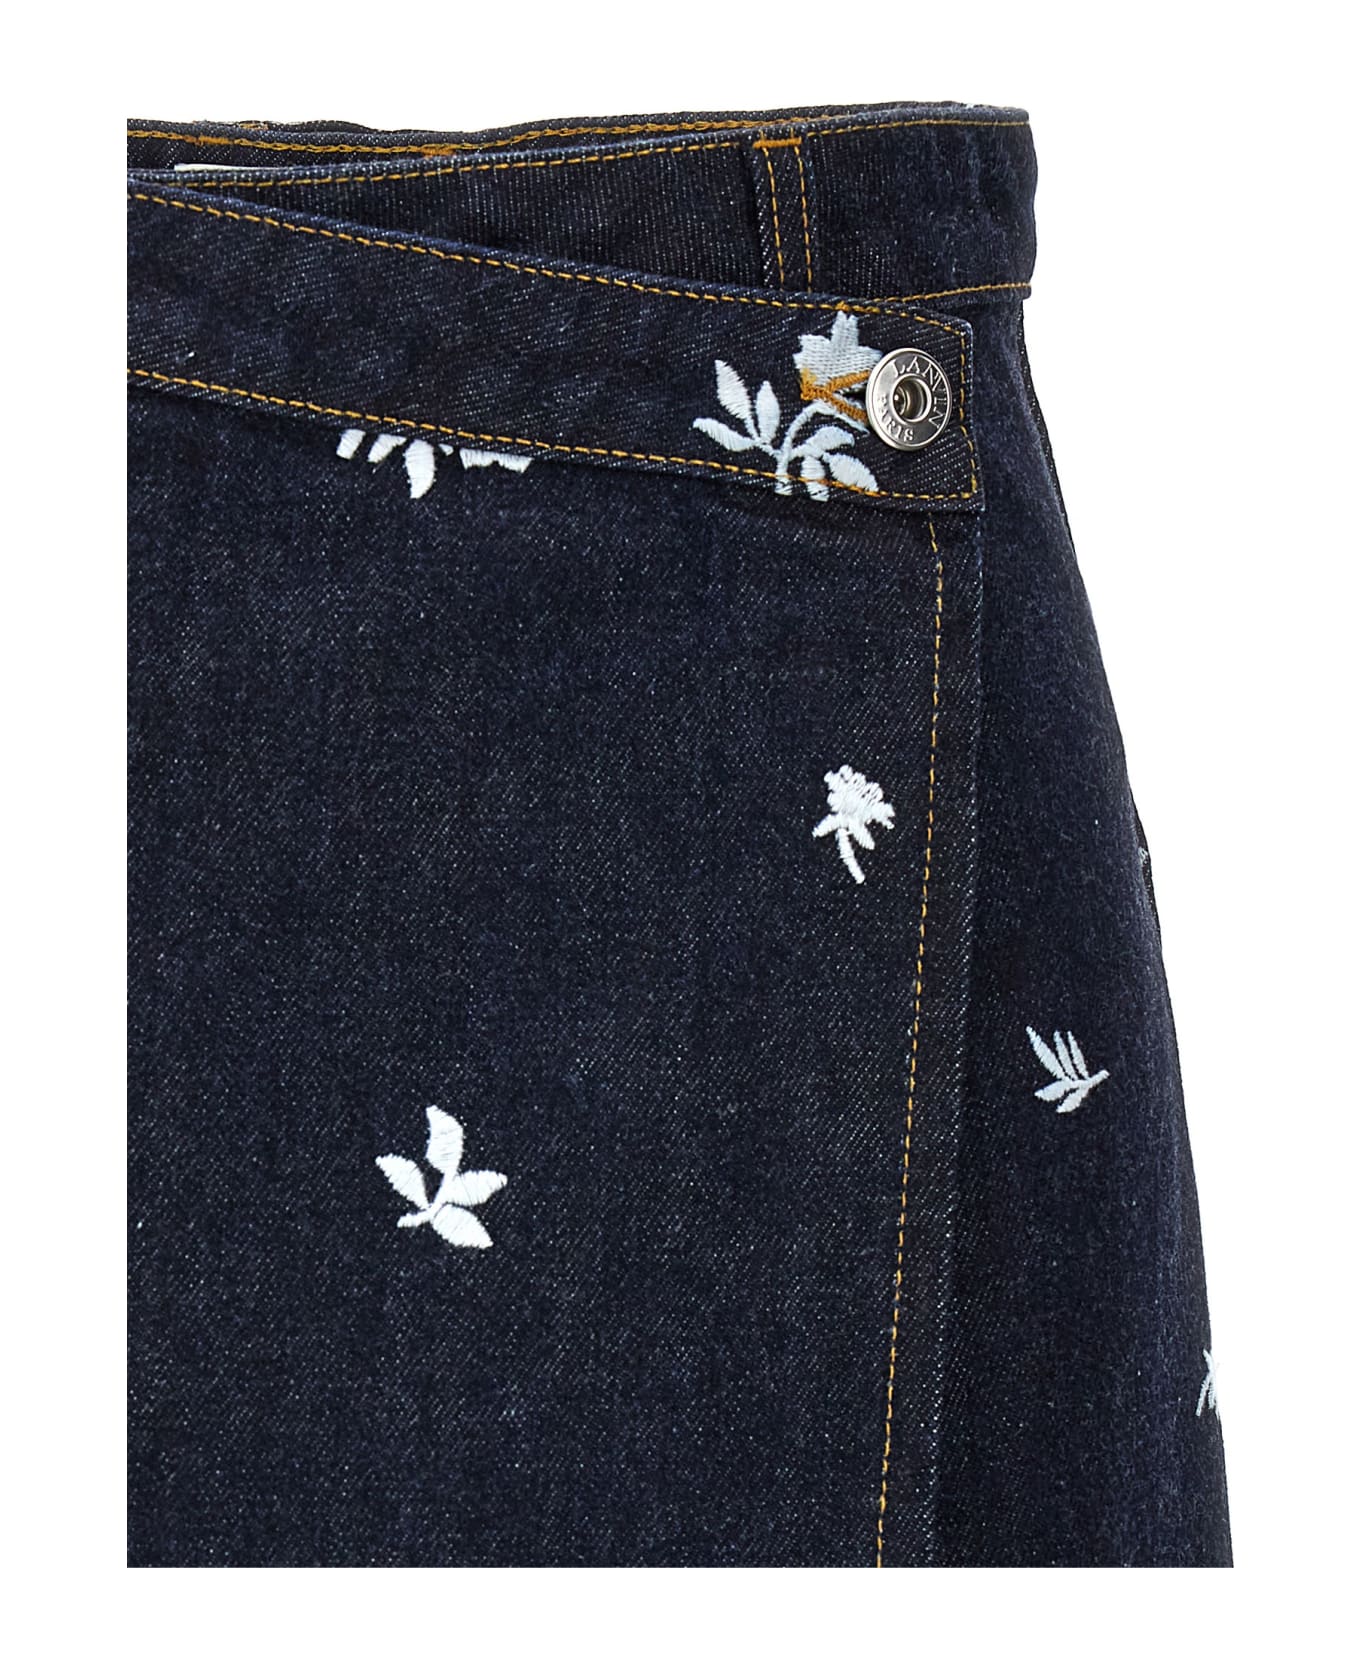 Lanvin All-over Embroidery Skirt - Navy Blue